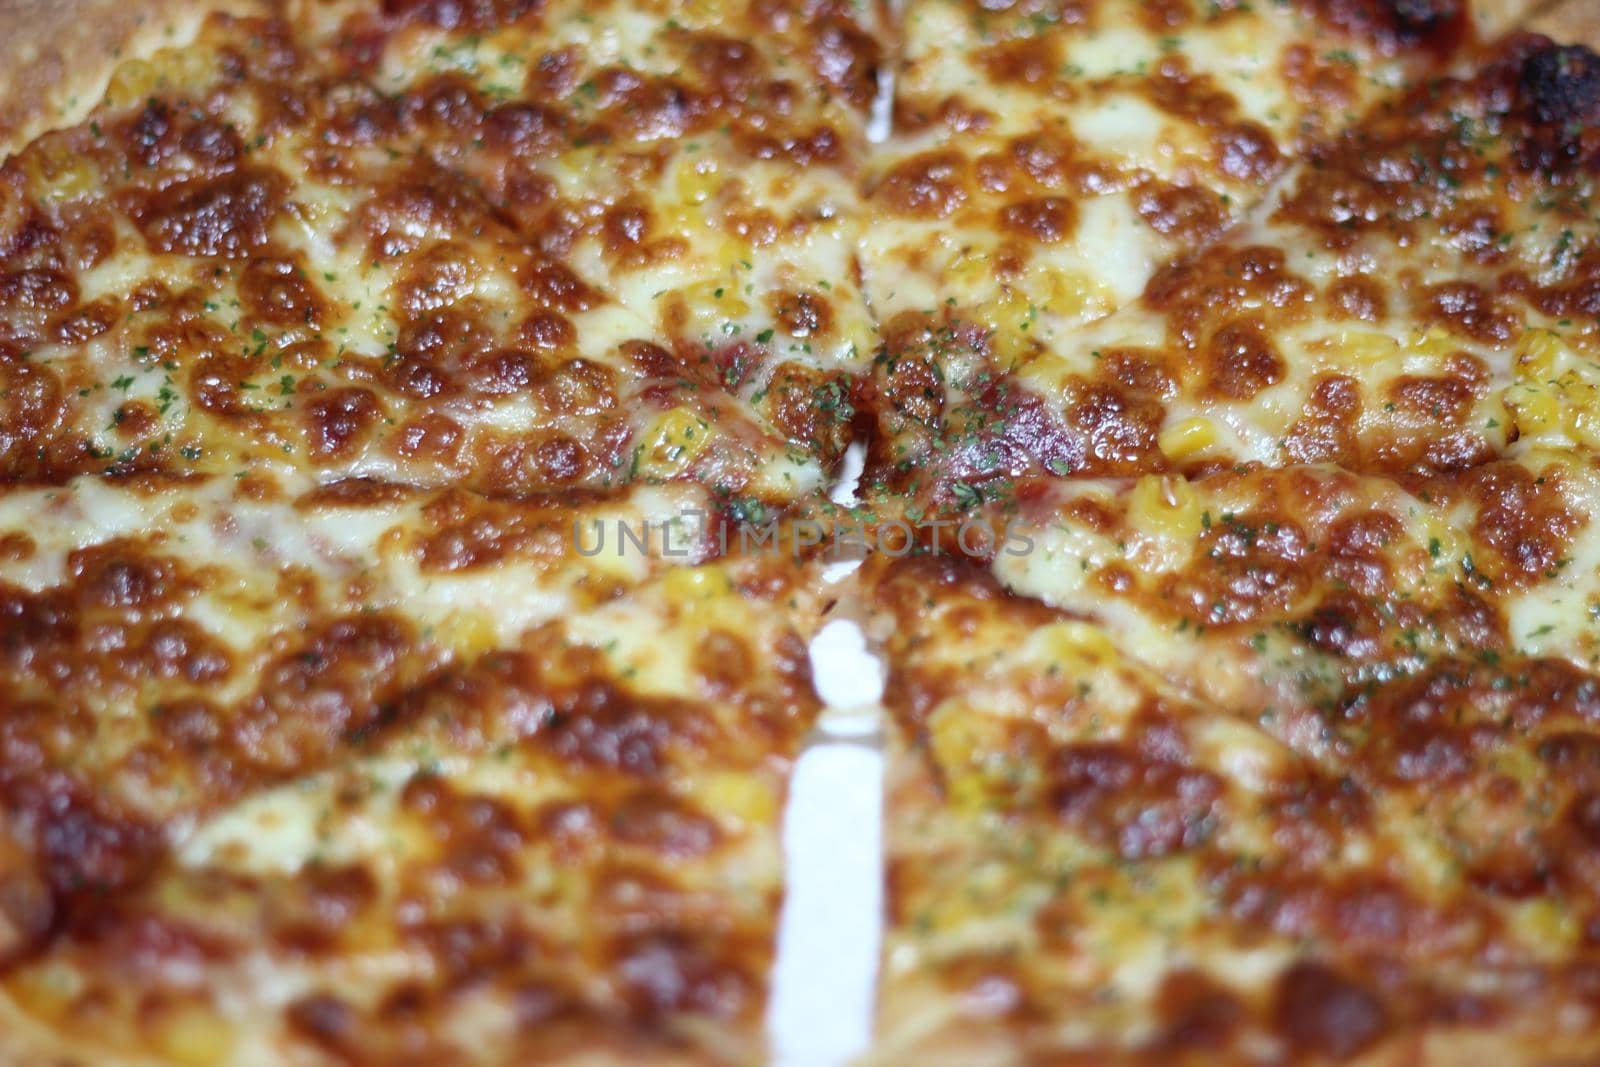 Pizza made with tasty pizza dough, cheese, tomatoes, and green olives. Closeup view of cheese pizza served for dinner